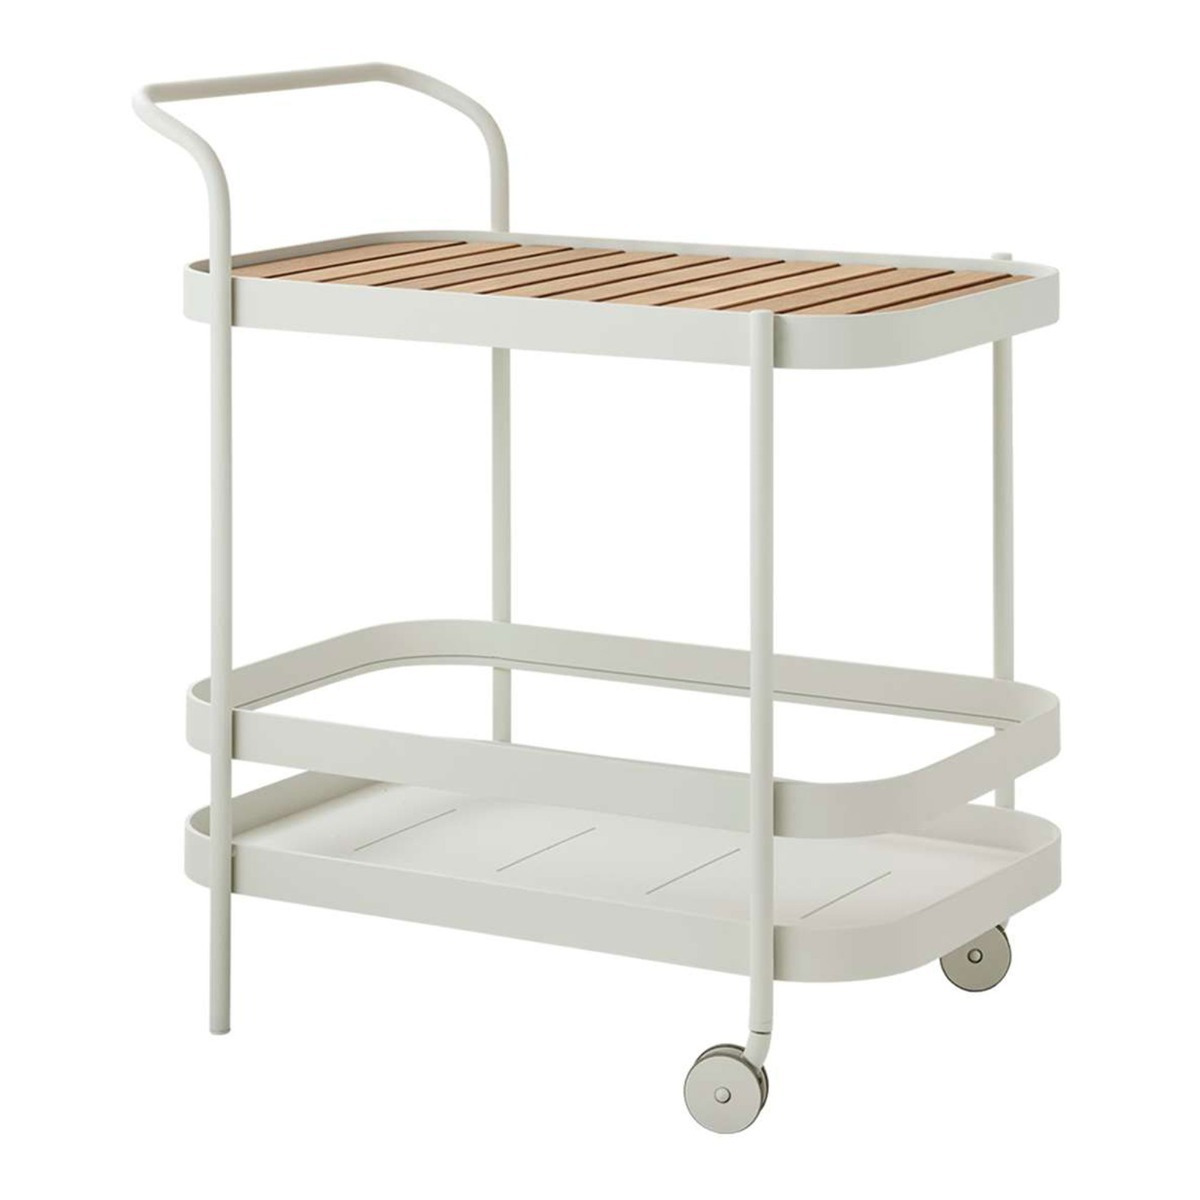 Cane Line Roll Bar Trolley, White Metal - Barker & Stonehouse - image 1